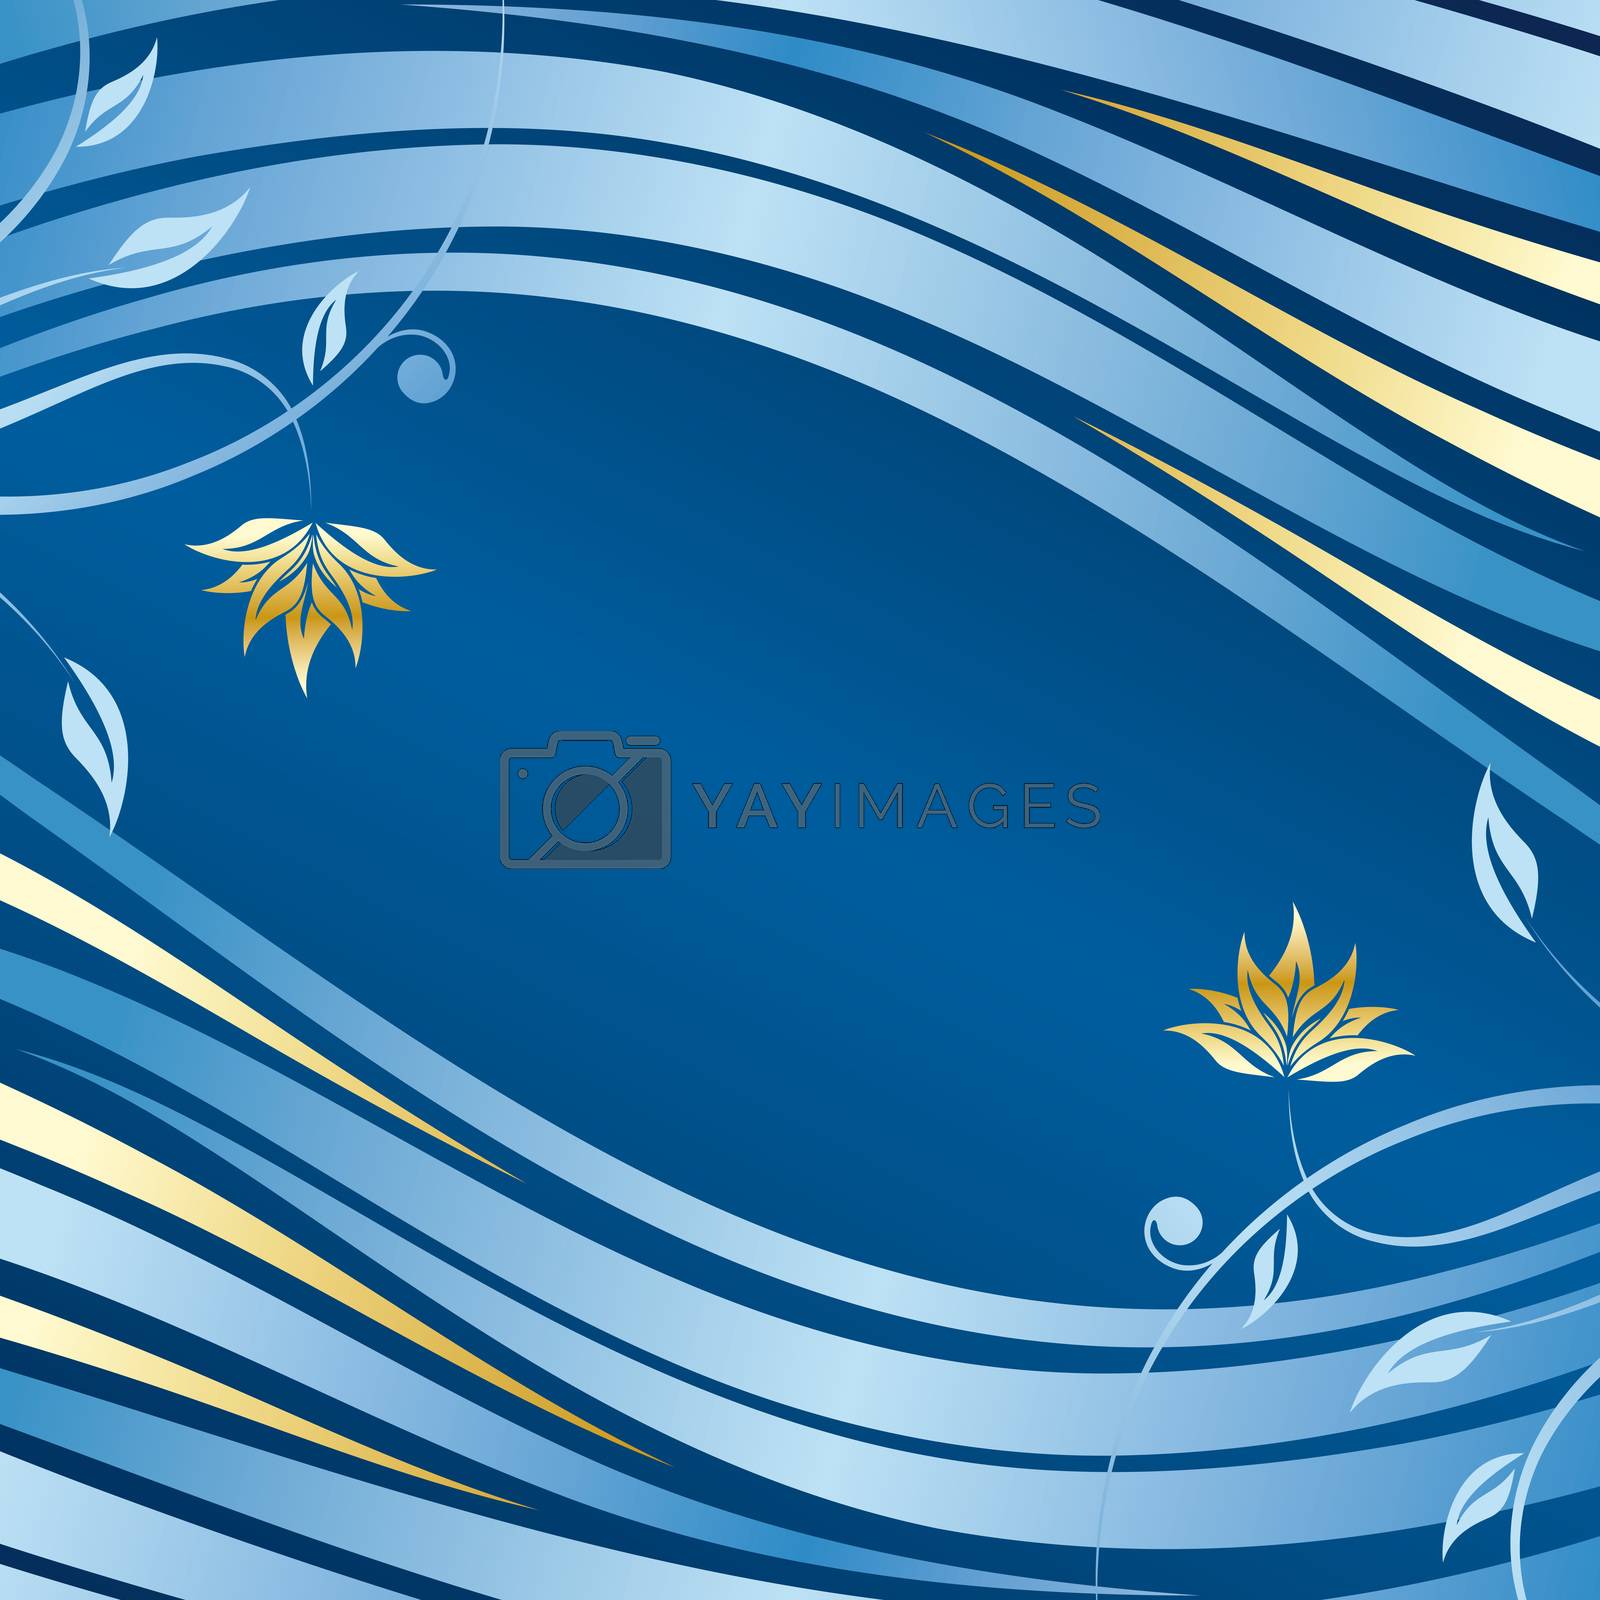 Royalty free image of Floral background by WaD